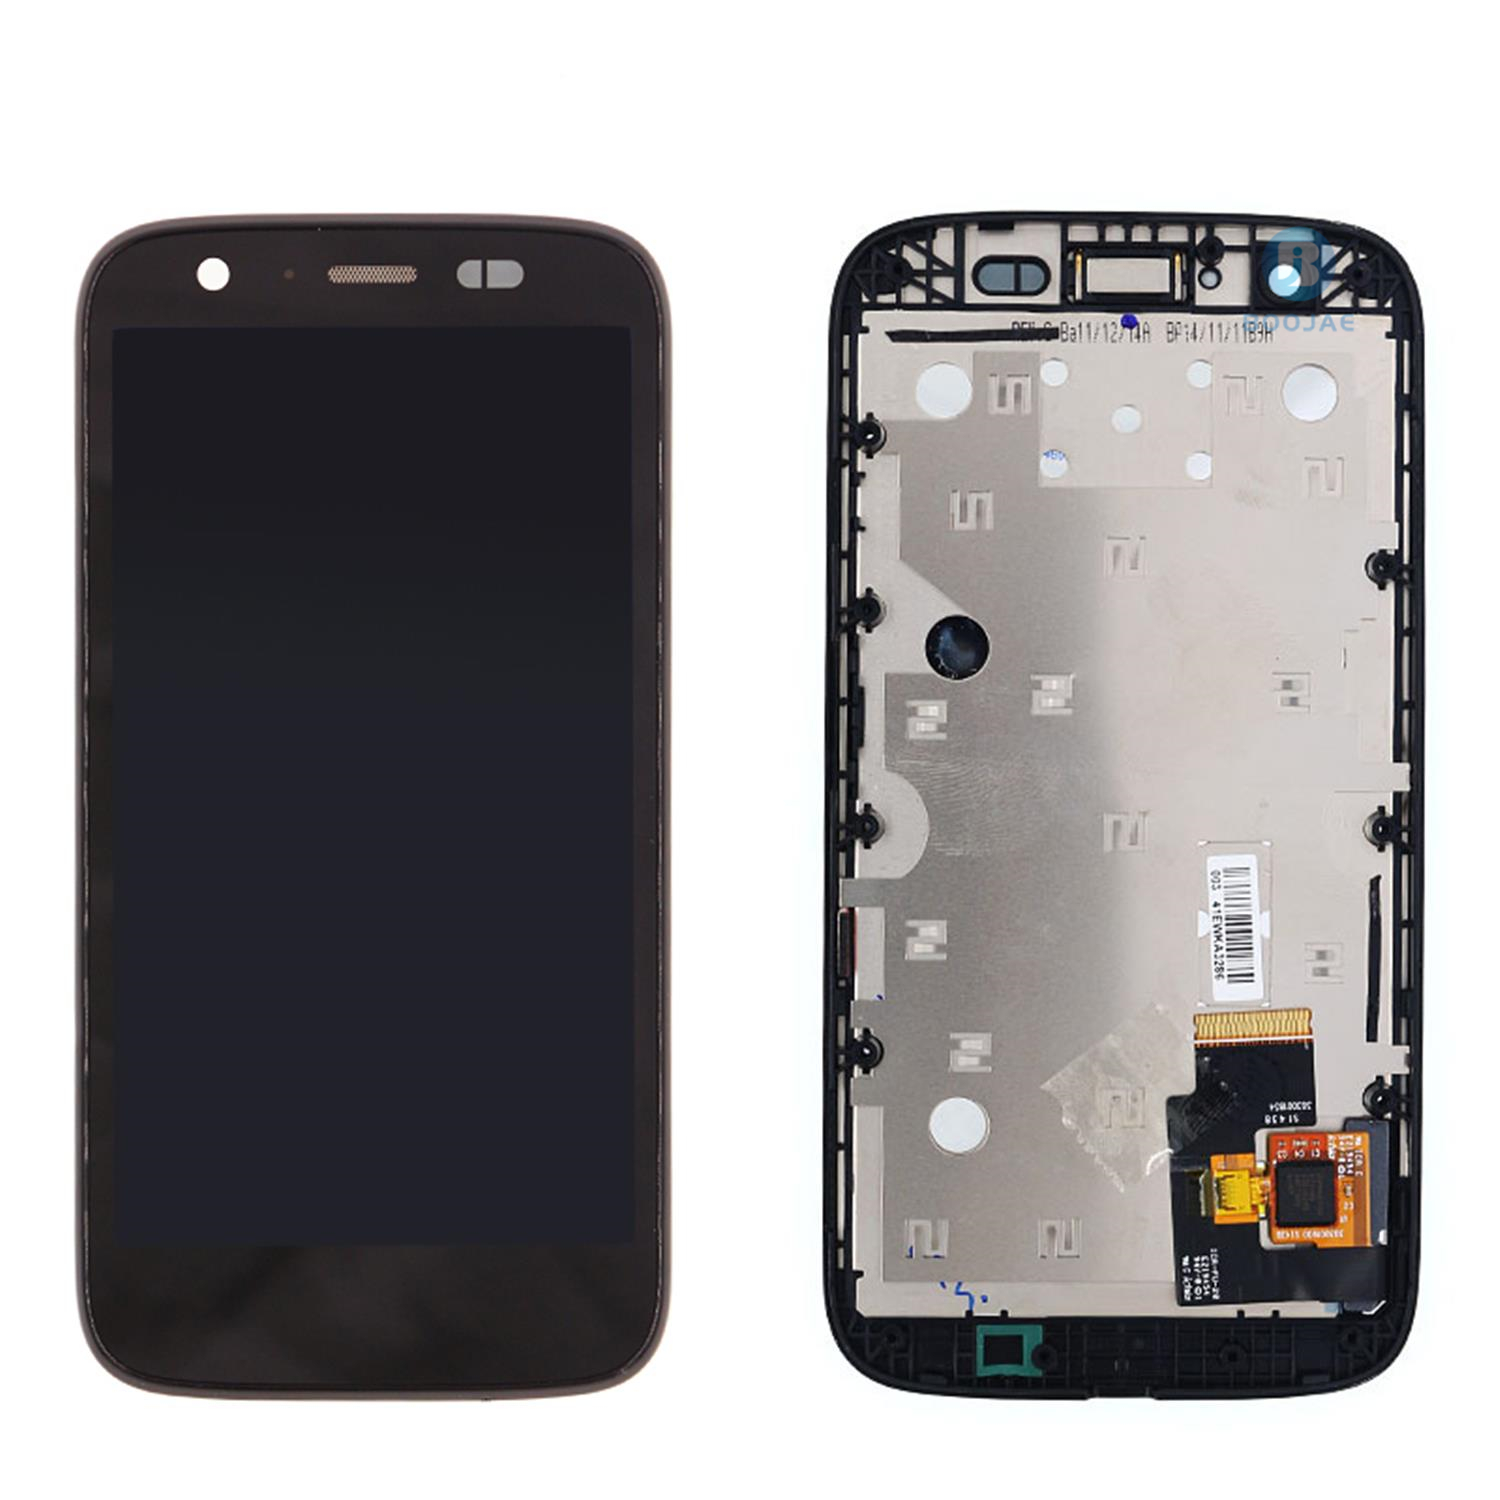 Motorola Moto XT1032 LCD Screen Display, Lcd Assembly Replacement